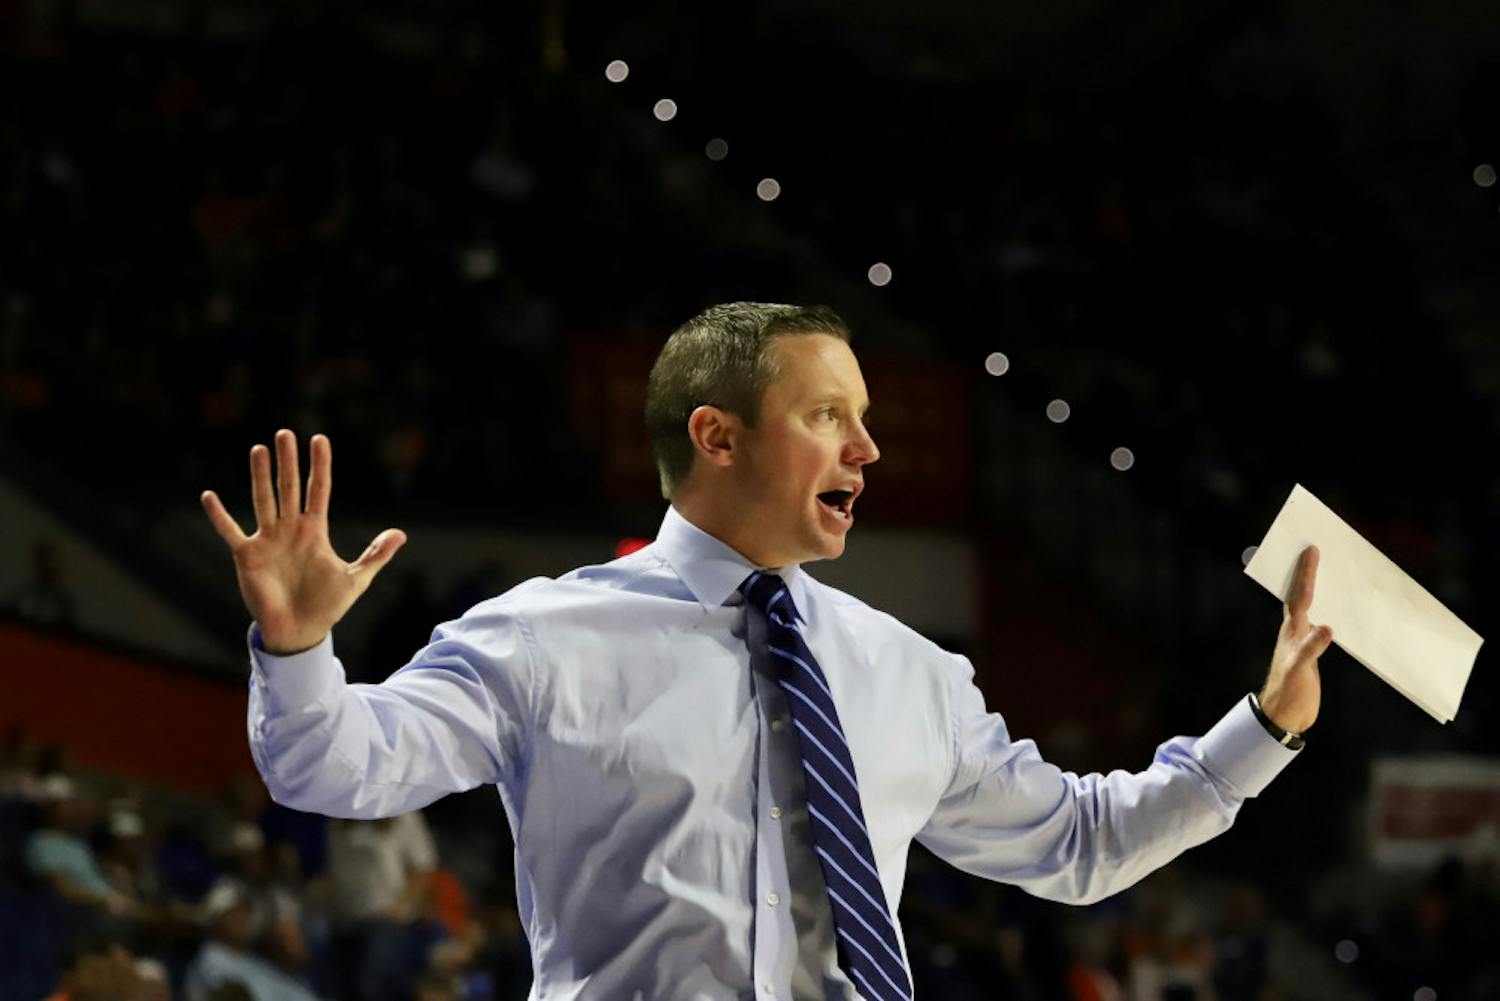 Gators coach Mike White is impressed with what he's seen from Boston College already this season. Florida will play the Eagles Thursday night at 9:30 p.m.